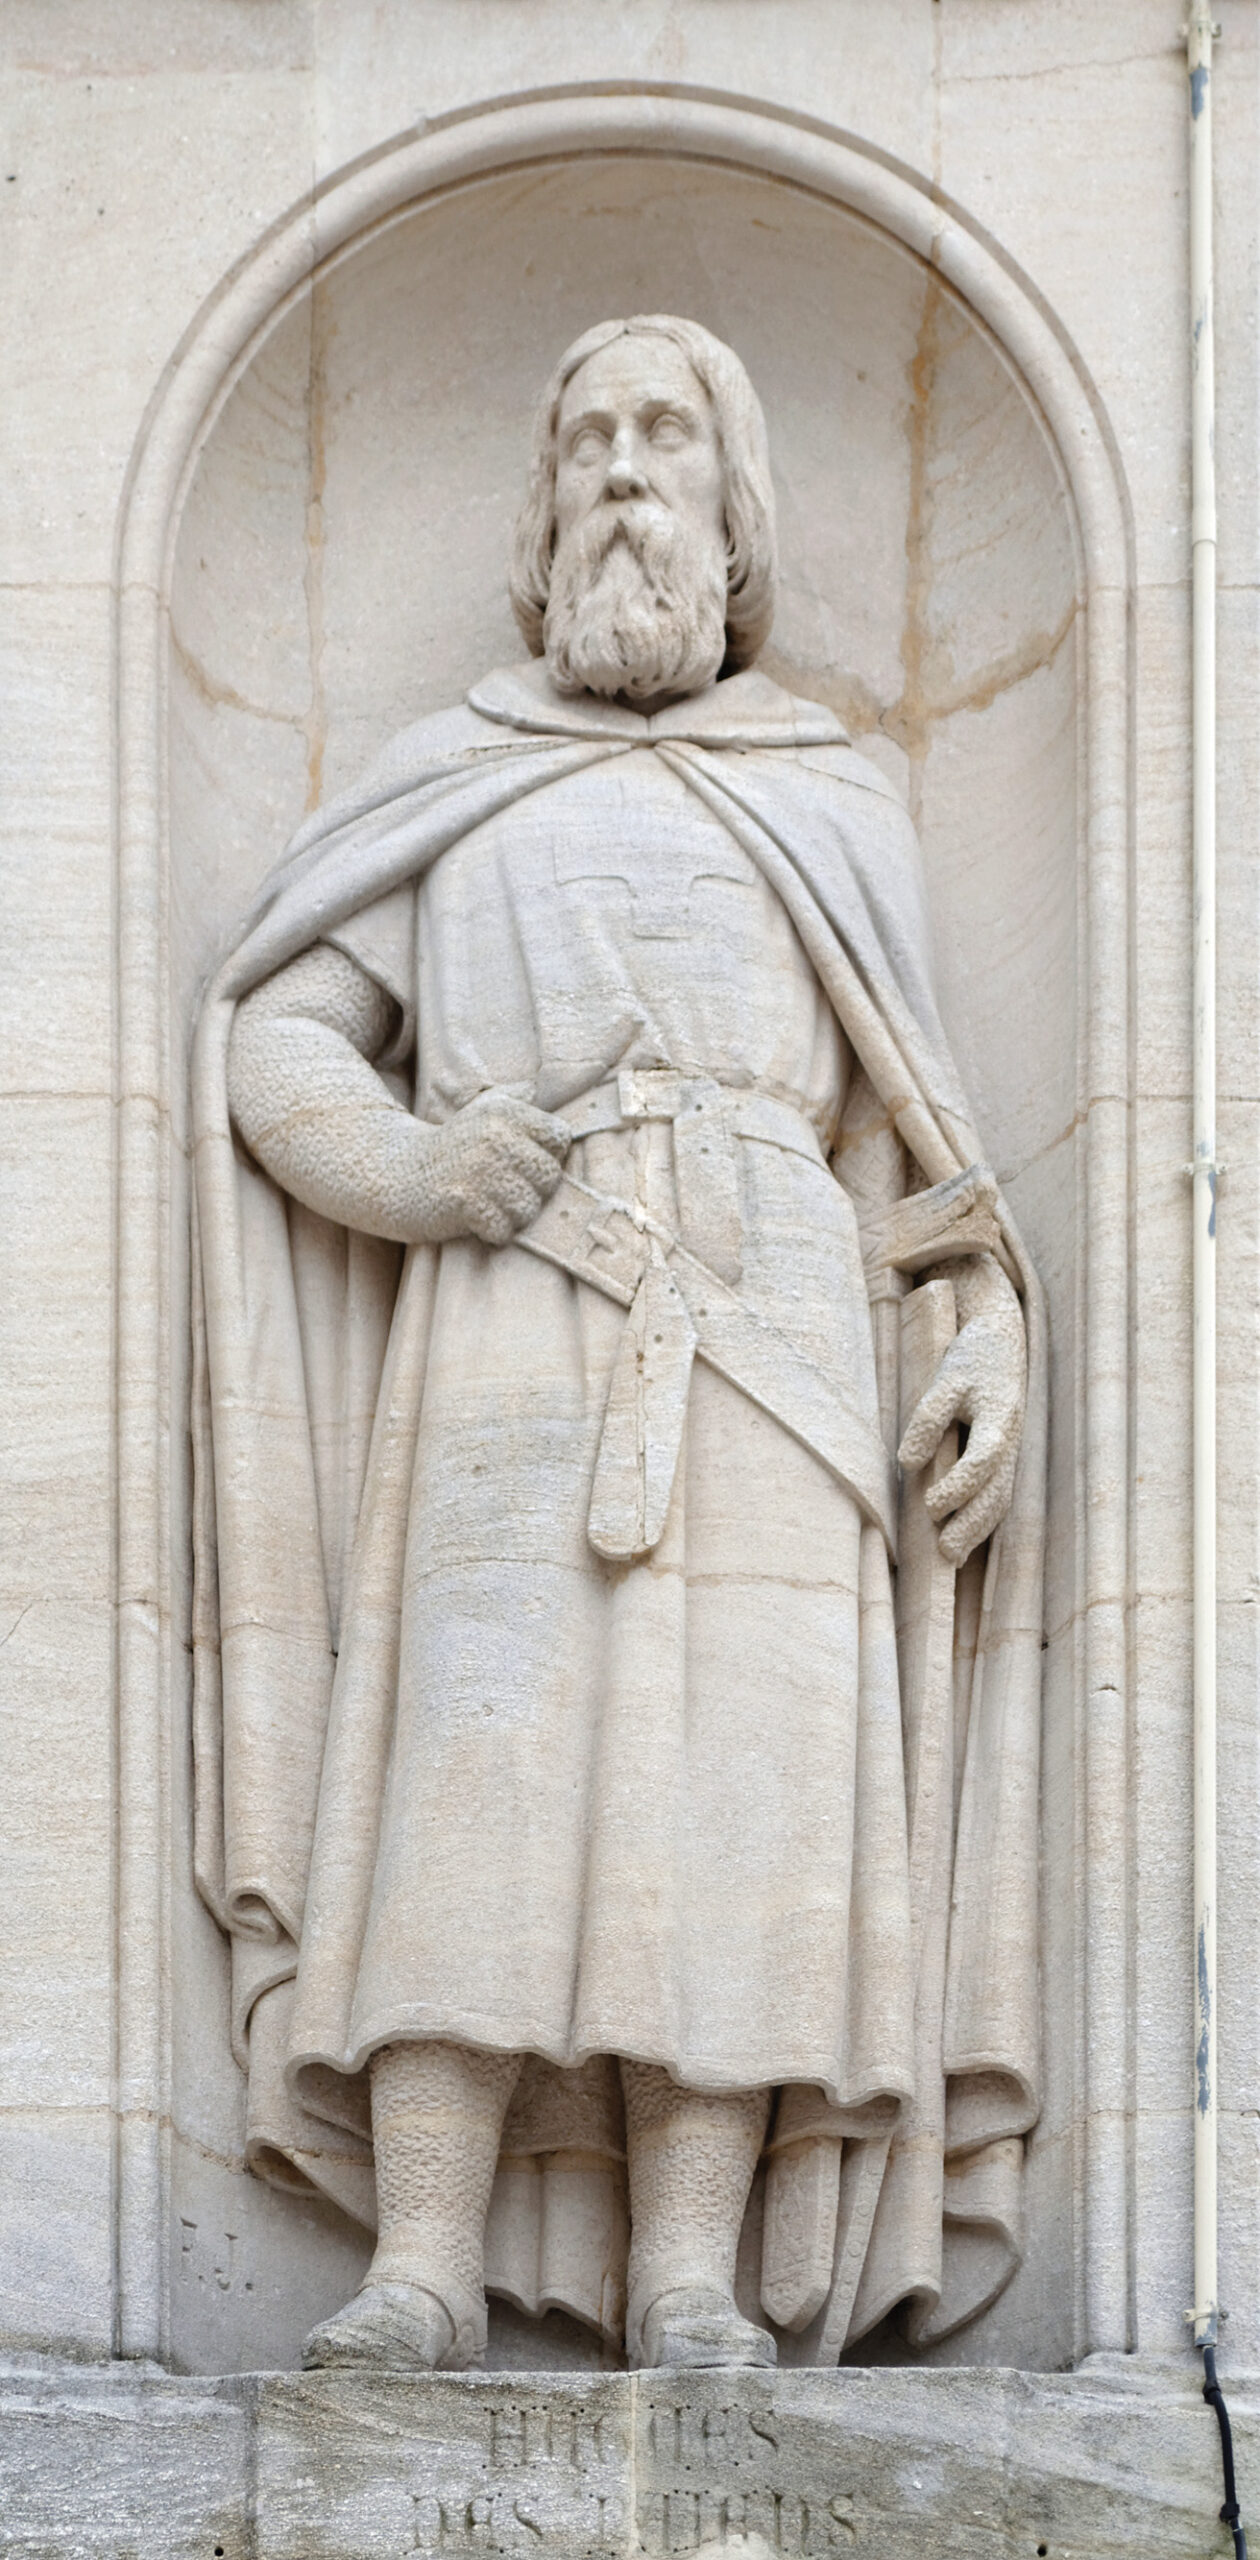 Frenchman Hughes de Payens received support in 1119 from King Baldwin II of Jerusalem to establish the Knights Templar. 